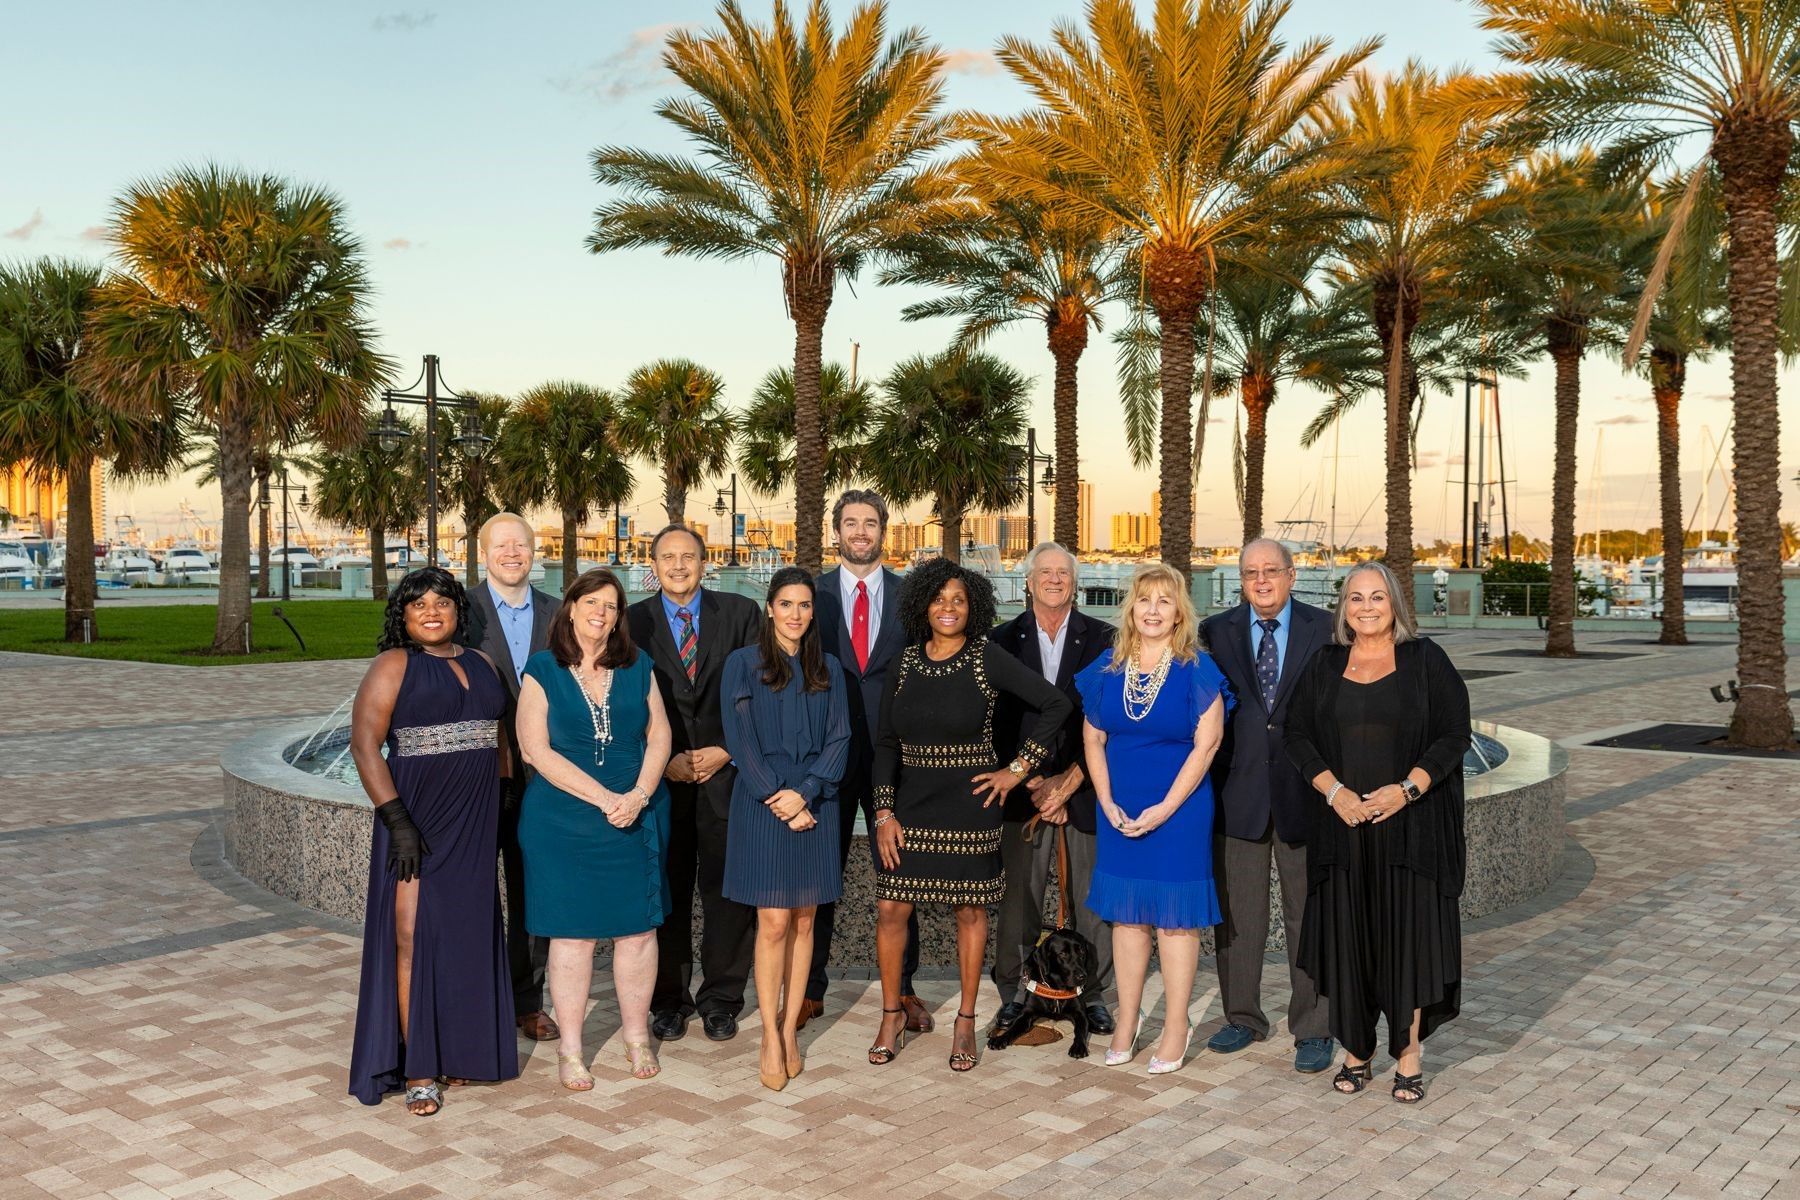 Lighthouse for the Blind of the Palm Beaches Board Members pose in front of a beach scene with boats and palm trees in the background.